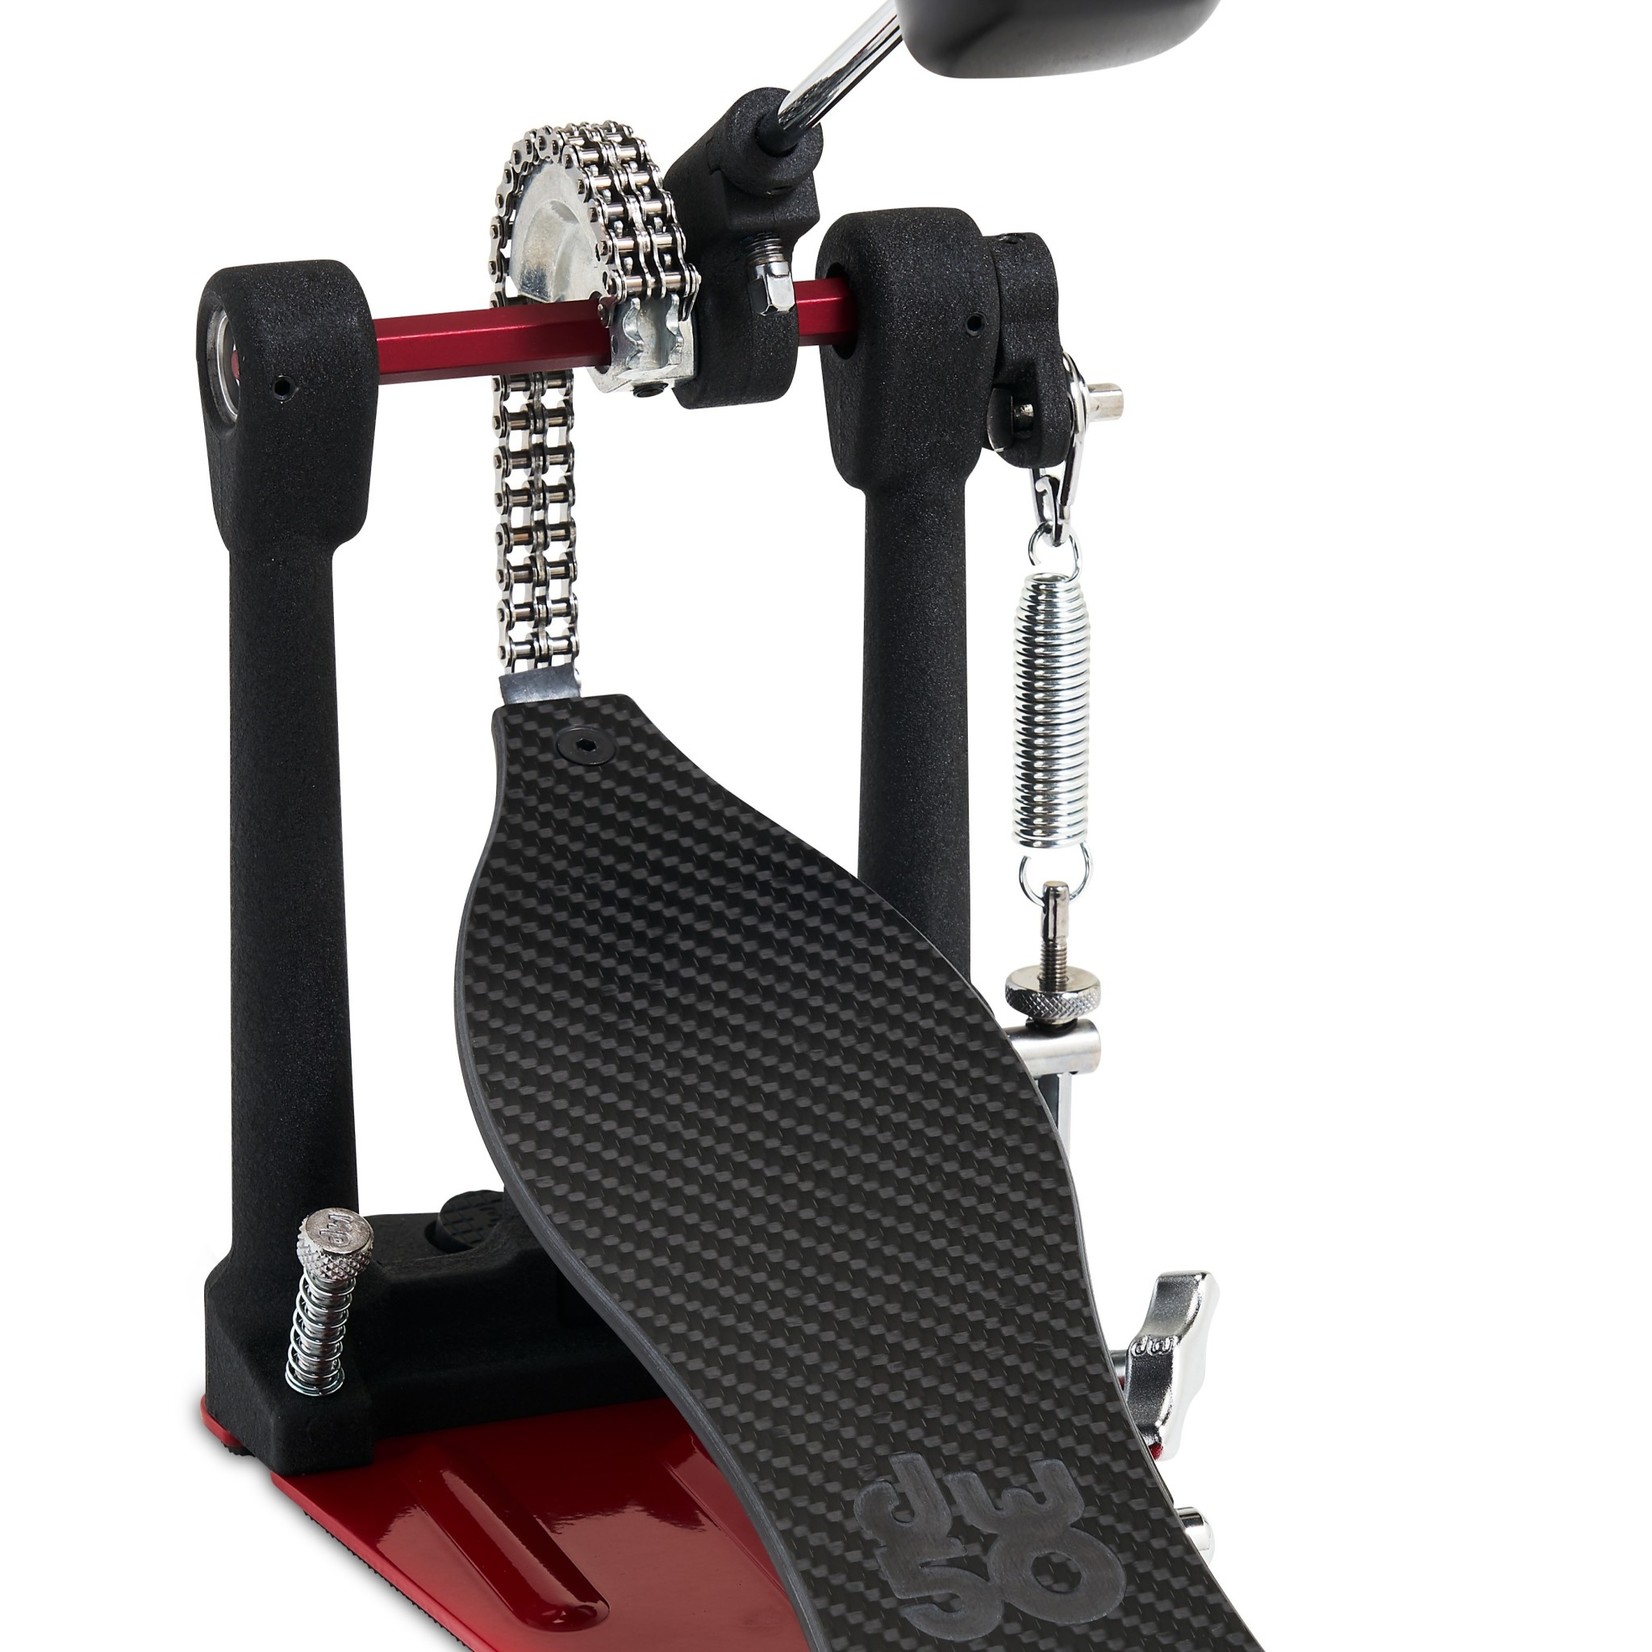 DW DW 50th Anniversary Limited Edition Carbon Fiber 5000 Series Single Pedal